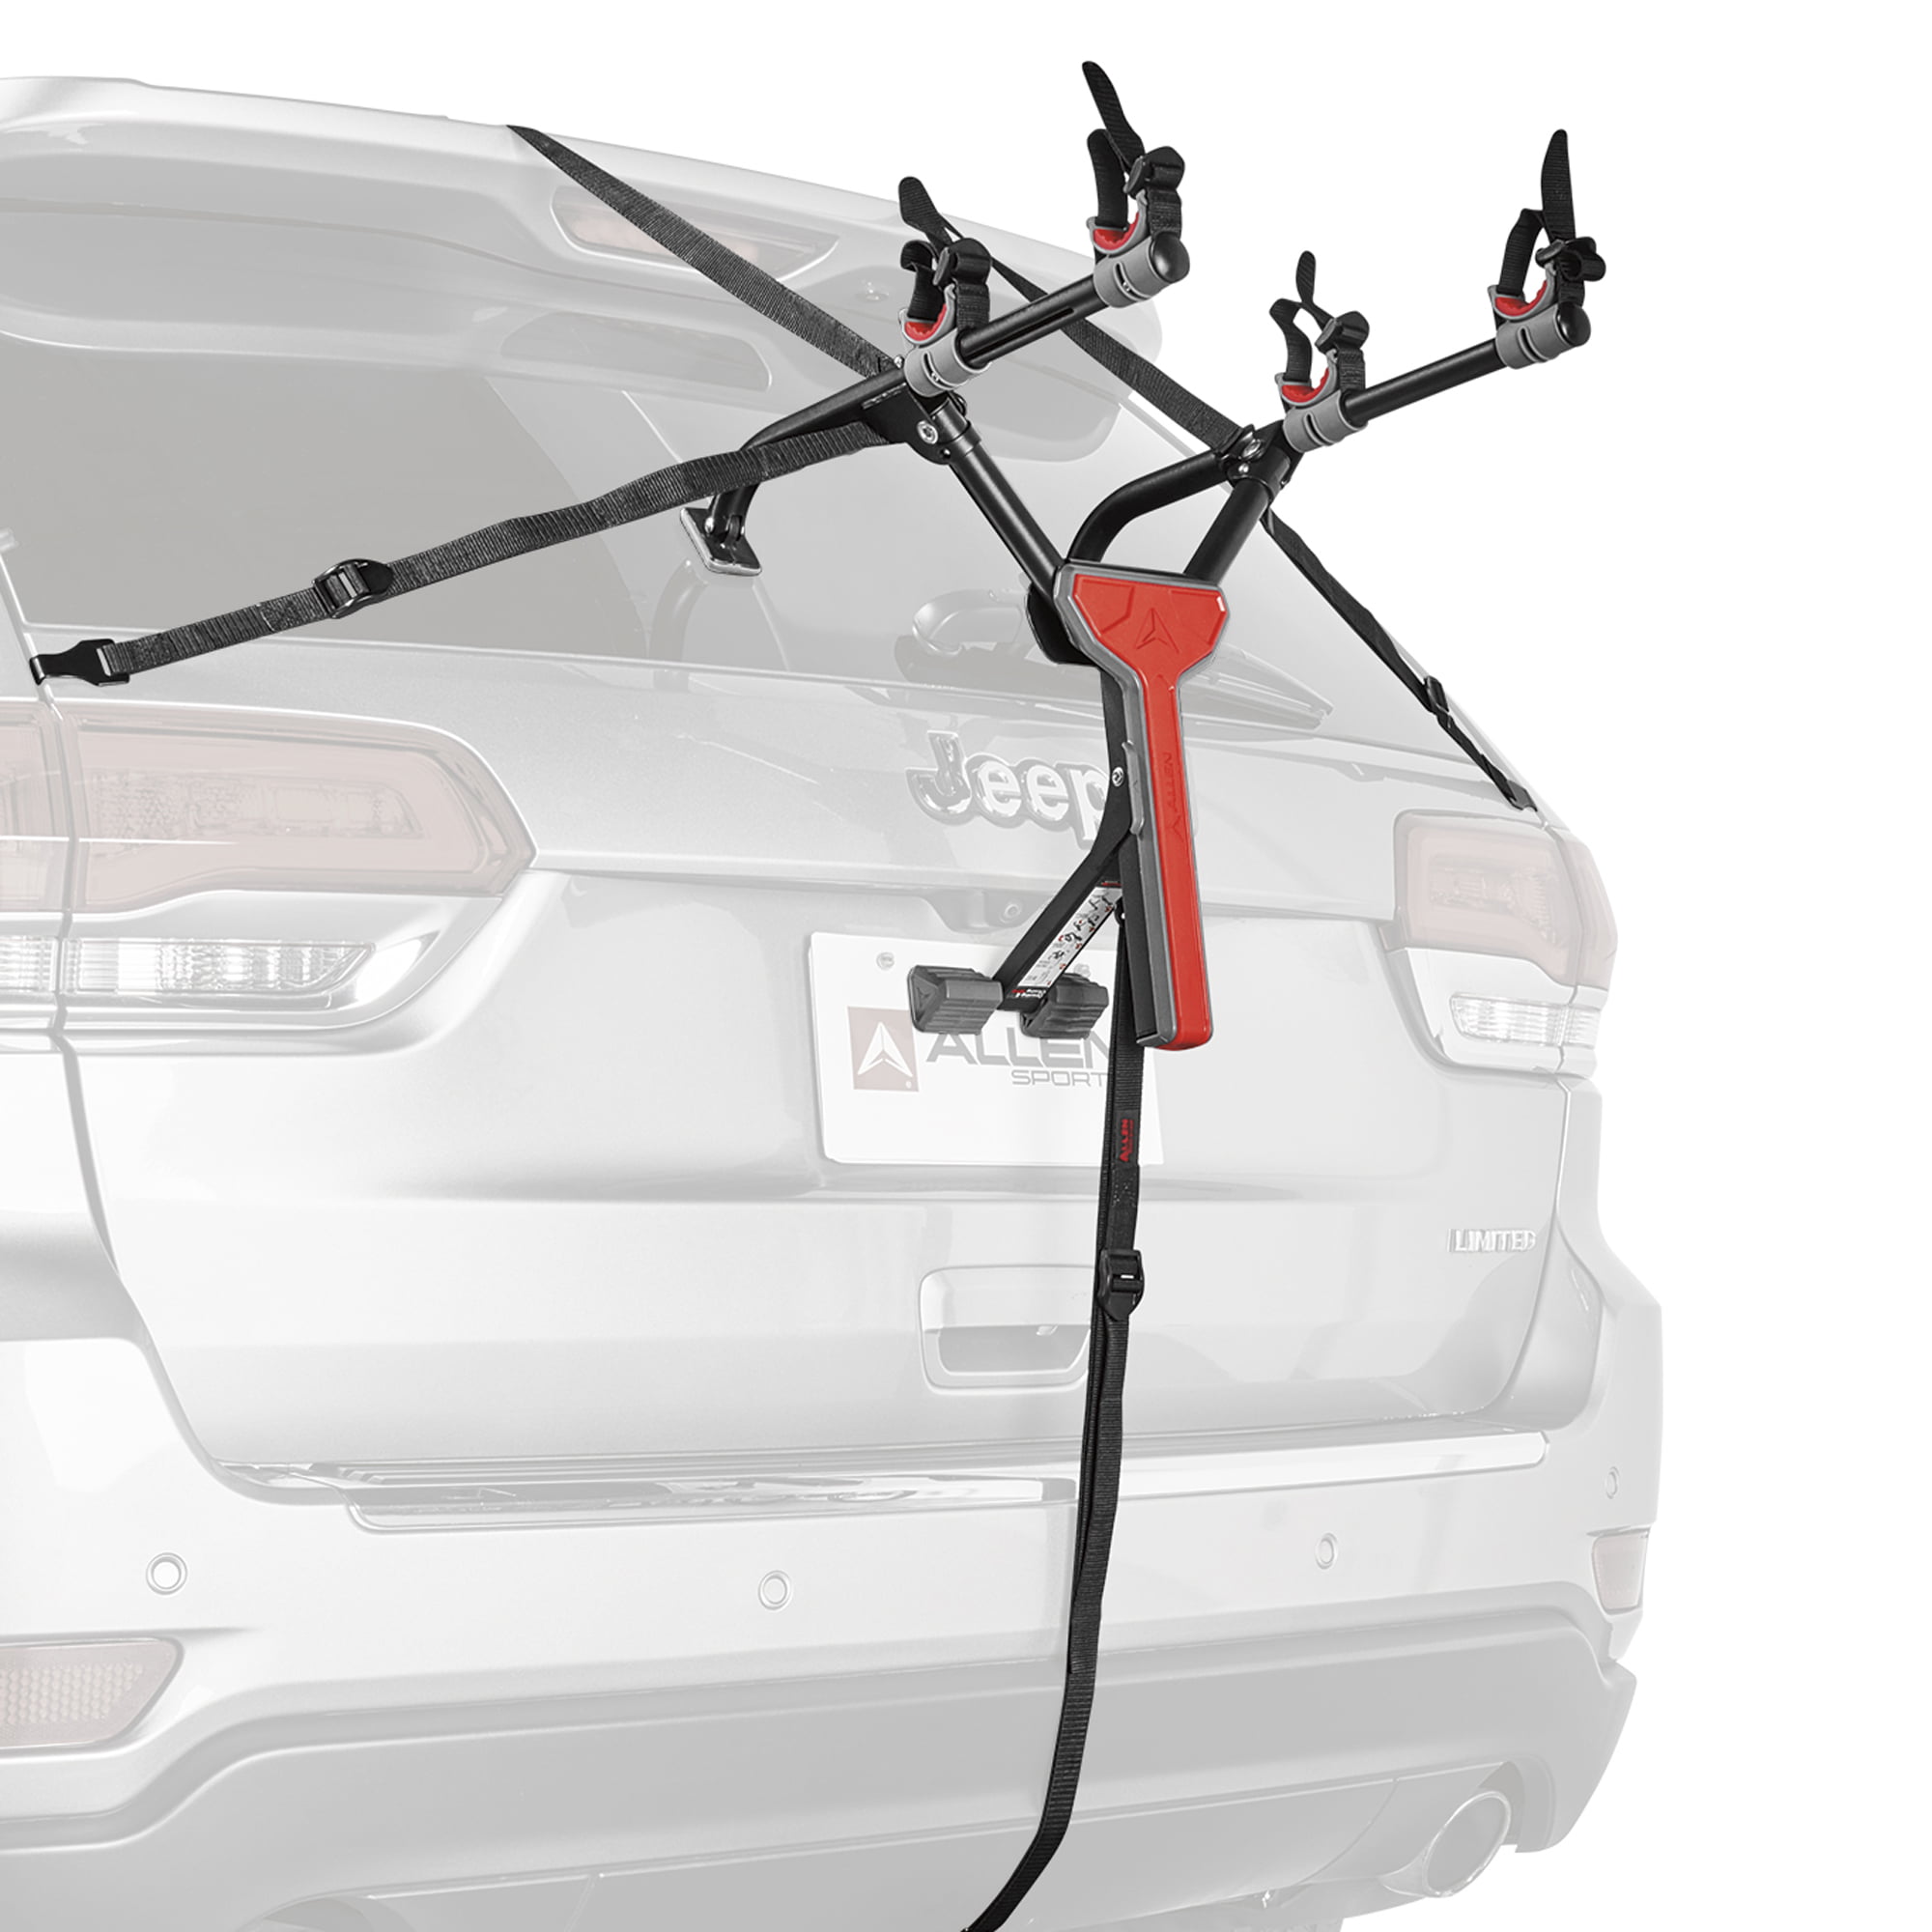 Fits Both 1.25 and 2 Receiver Tyger Auto TG-RK3B101S 3-Bike Hitch Mount Bicycle Carrier Rack Cable Lock